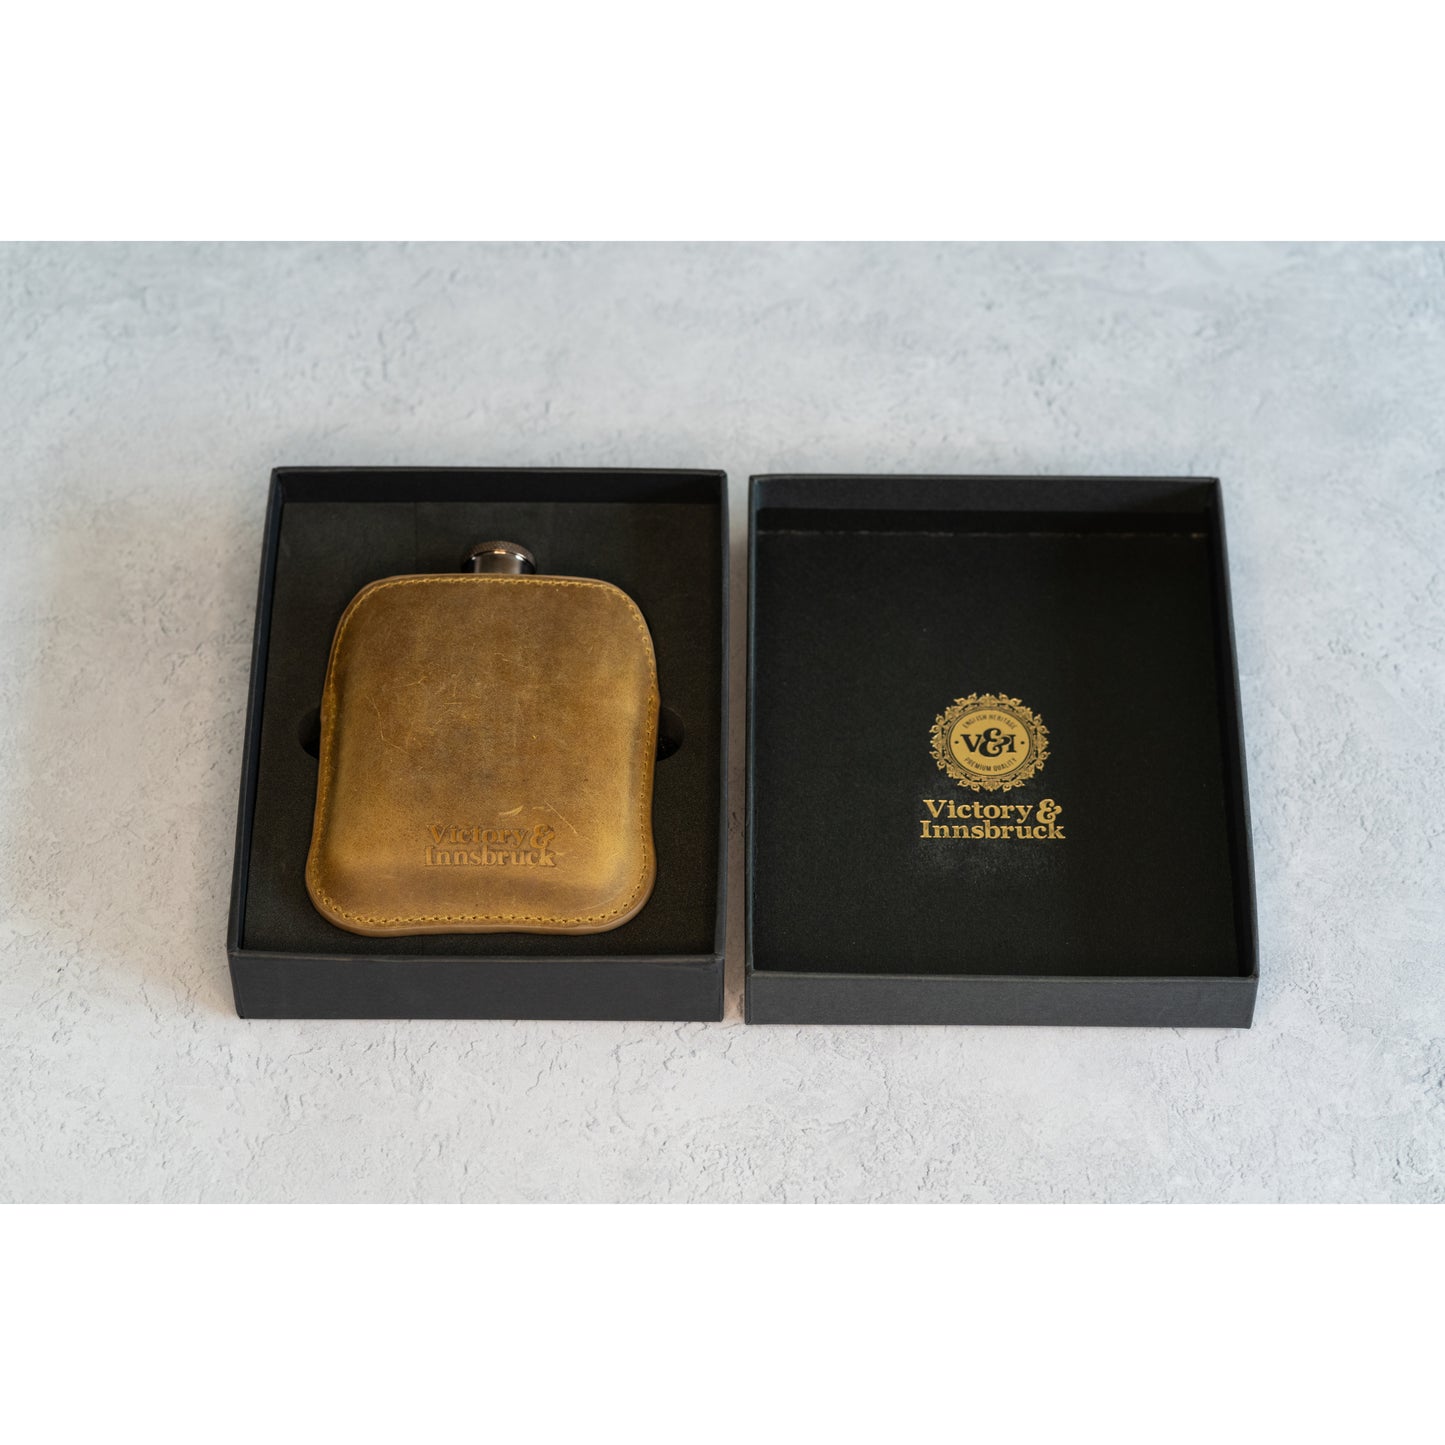 Full Grain Leather Cased Hip Flask | Full Tan Brown Leather | Copper Flask